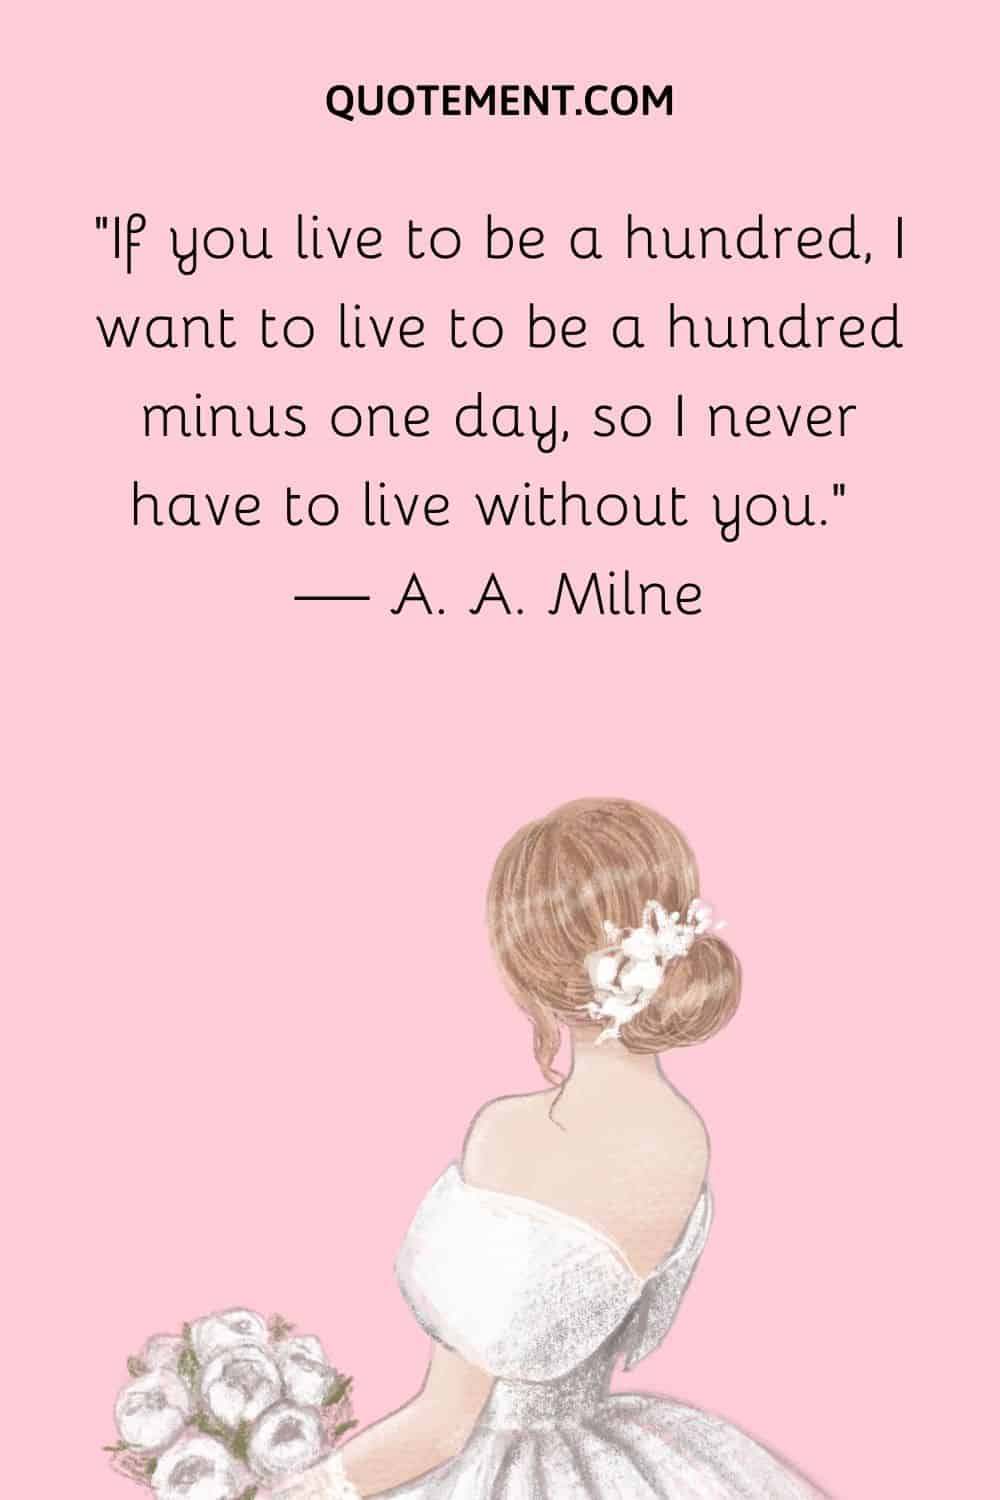 “If you live to be a hundred, I want to live to be a hundred minus one day, so I never have to live without you.” — A. A. Milne